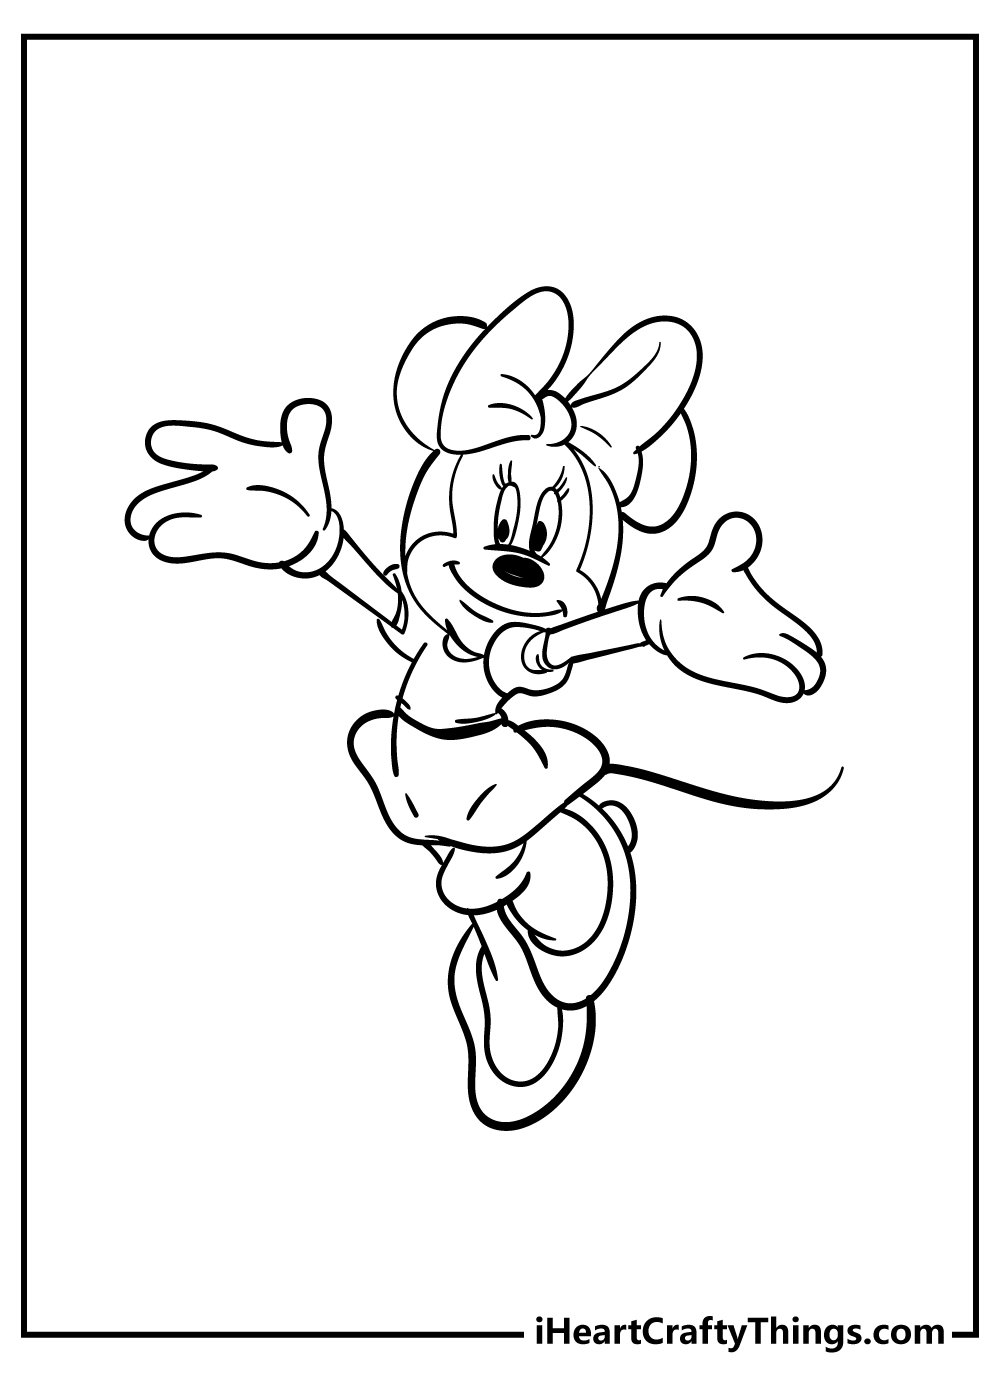 Minnie Mouse coloring pages free printable